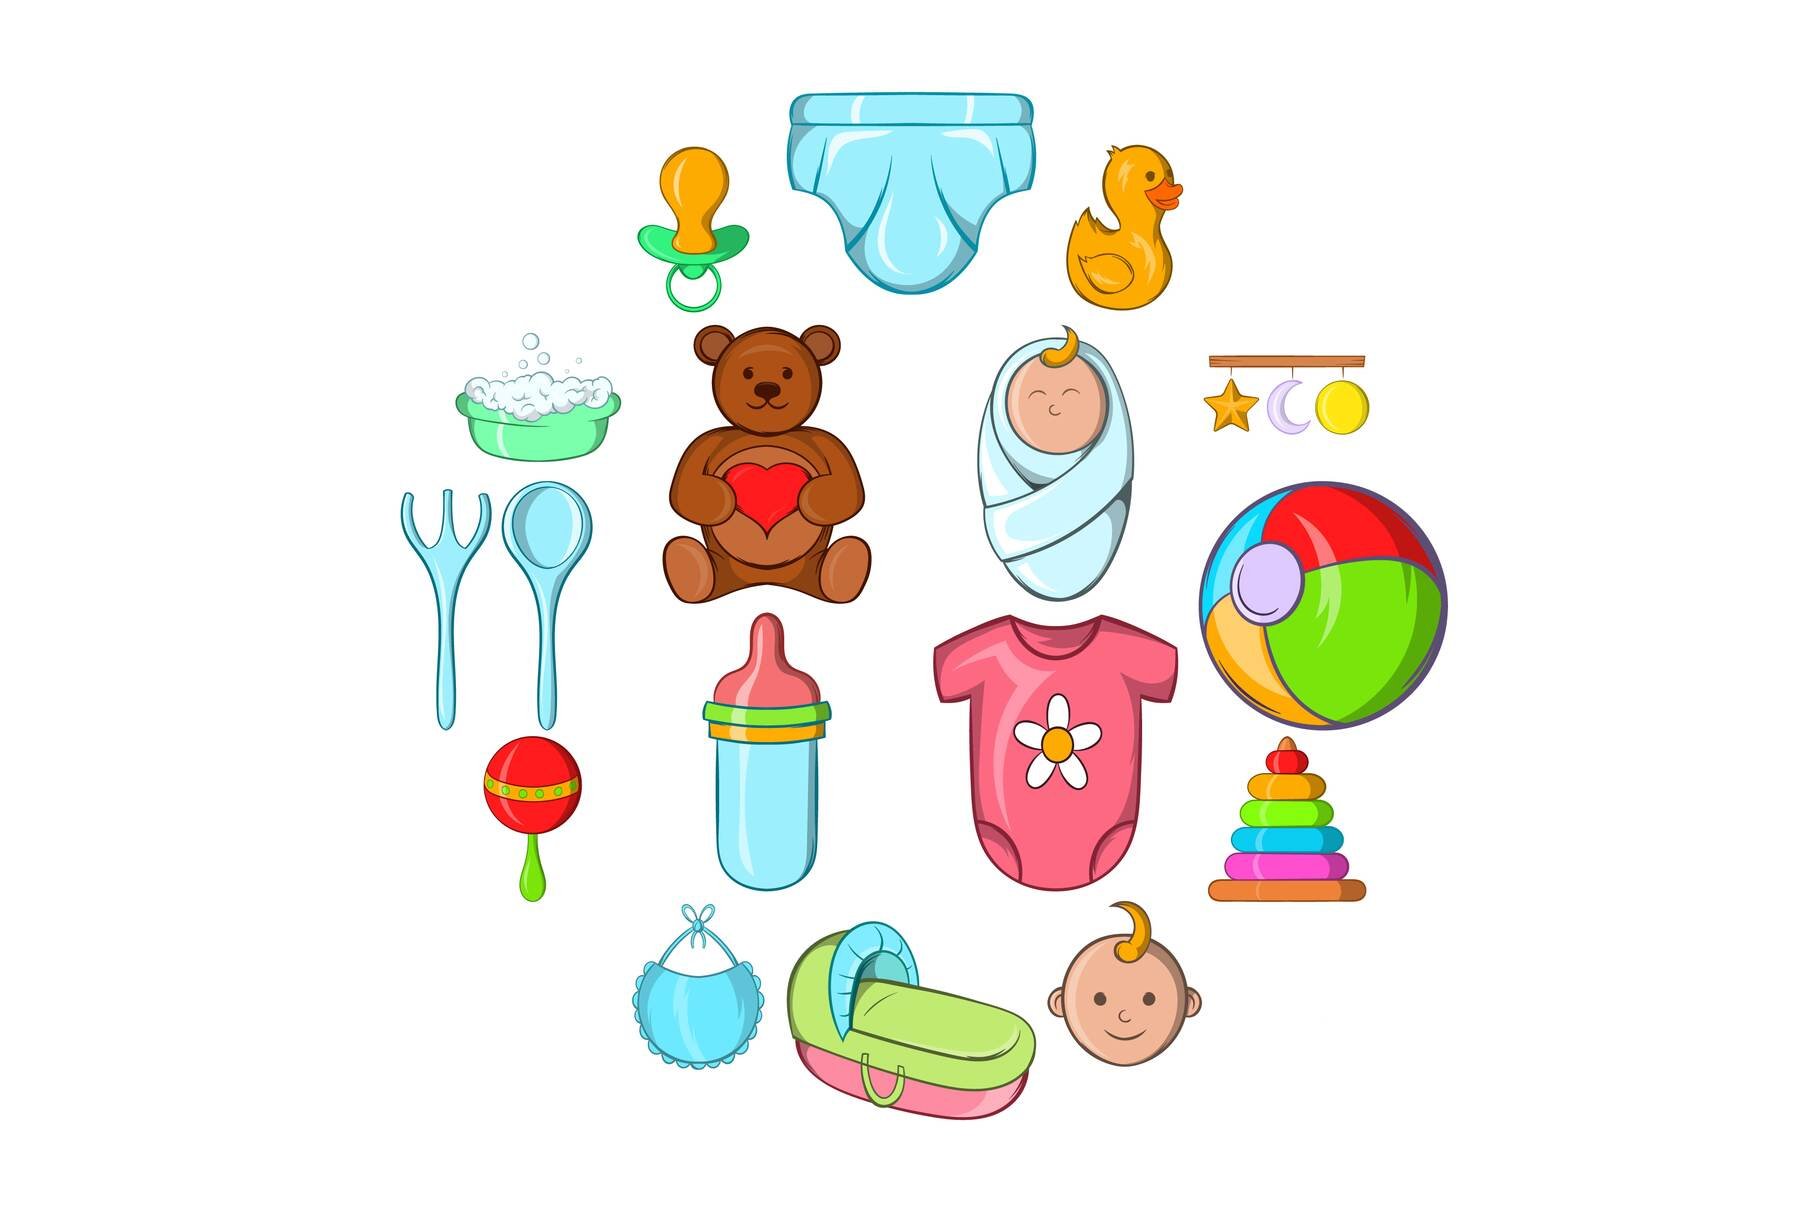 Baby icons set, cartoon style cover image.